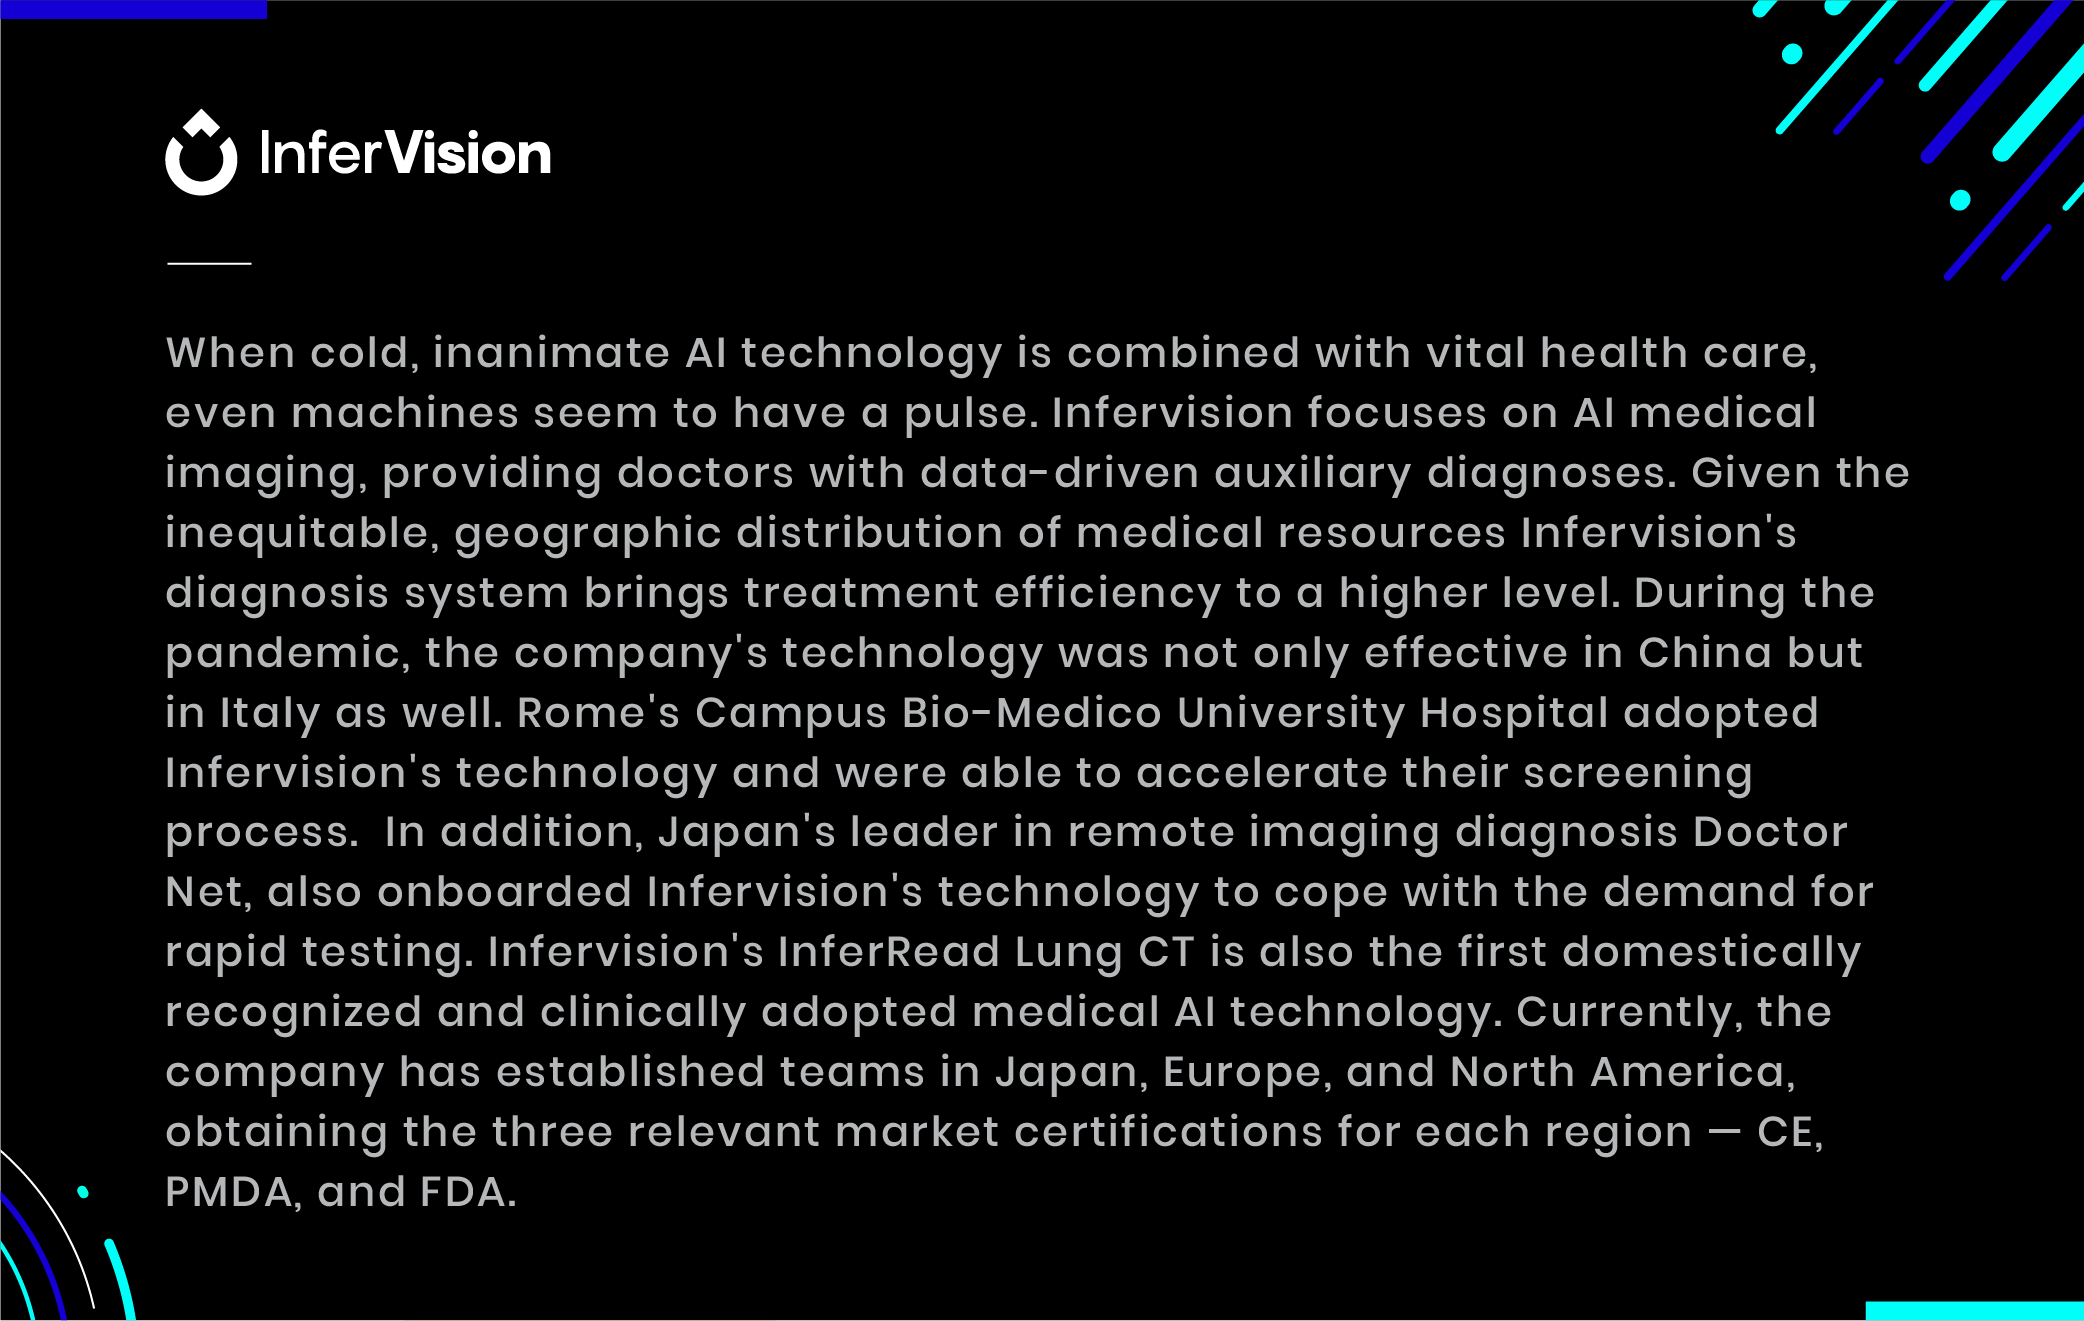 Infervision artificial intelligence medical imaging data driven diagnoses china italy japan us inferead lung ct ce pmda fda